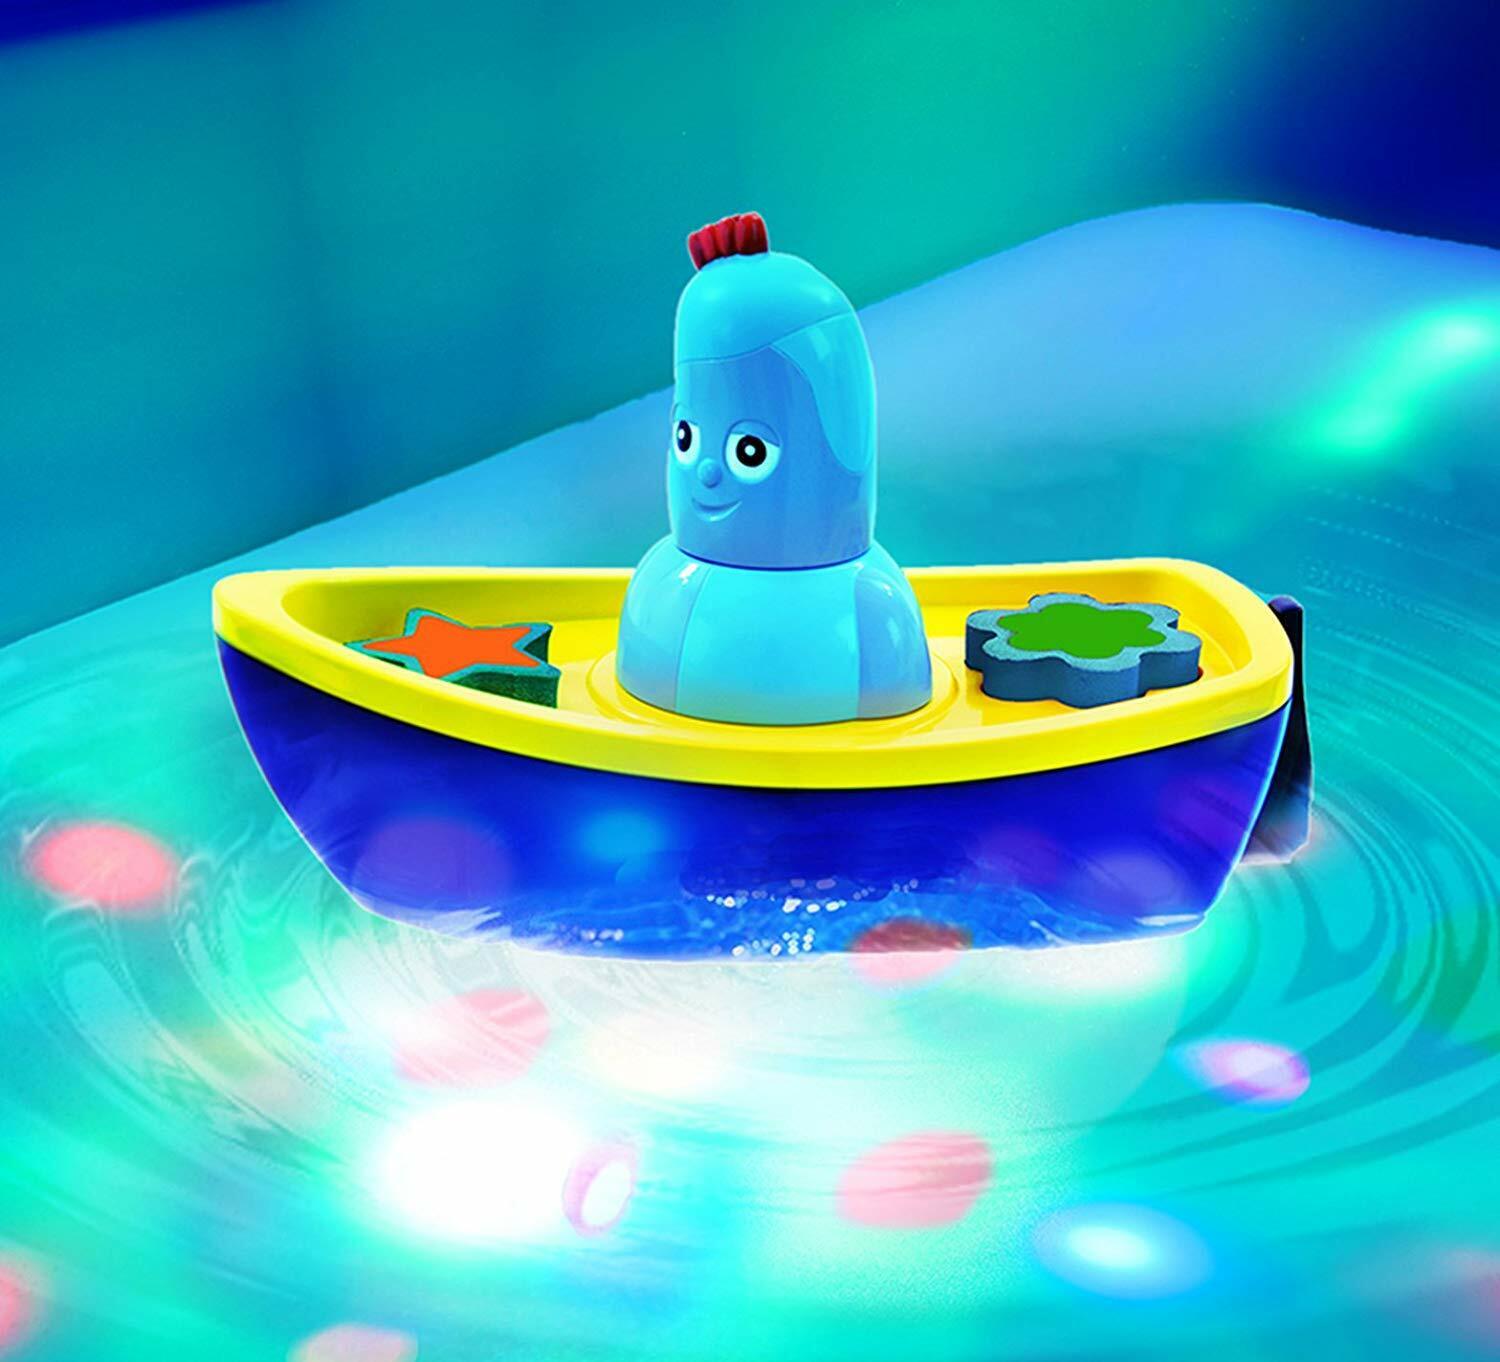 In the Night Garden Lightshow Bath-time Boat - Igglepiggle - NEW!